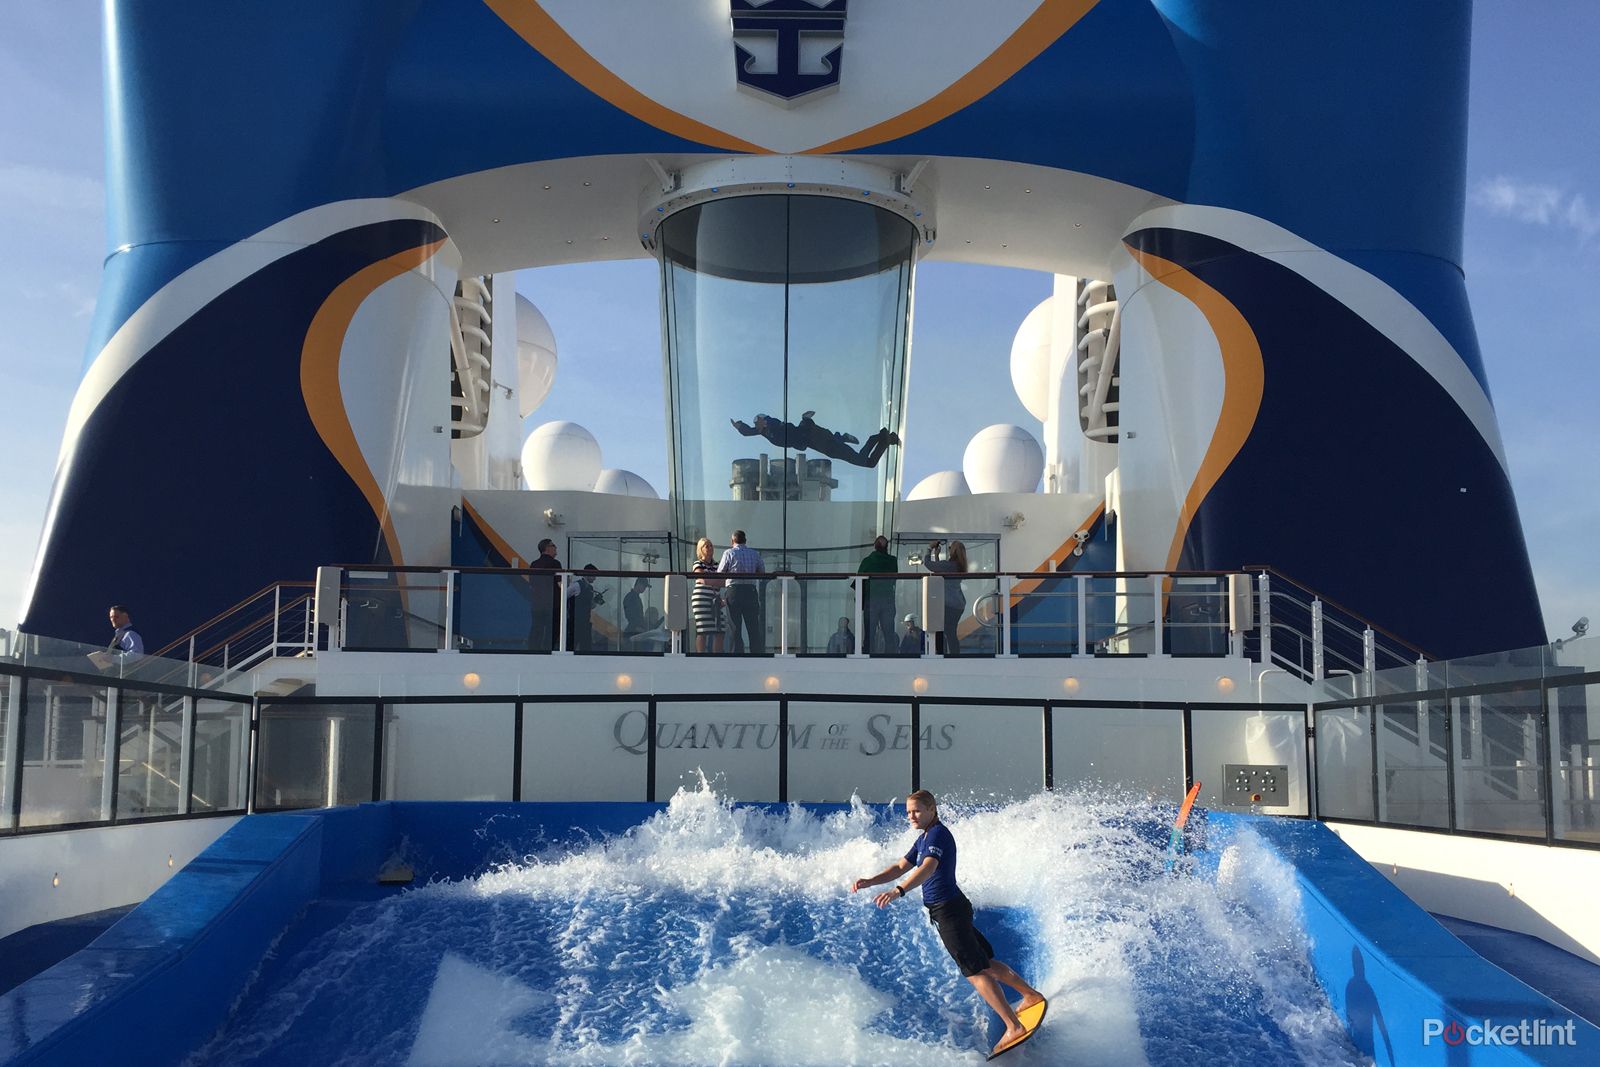 royal caribbean s quantum of the seas we step aboard the smartest ship afloat image 1